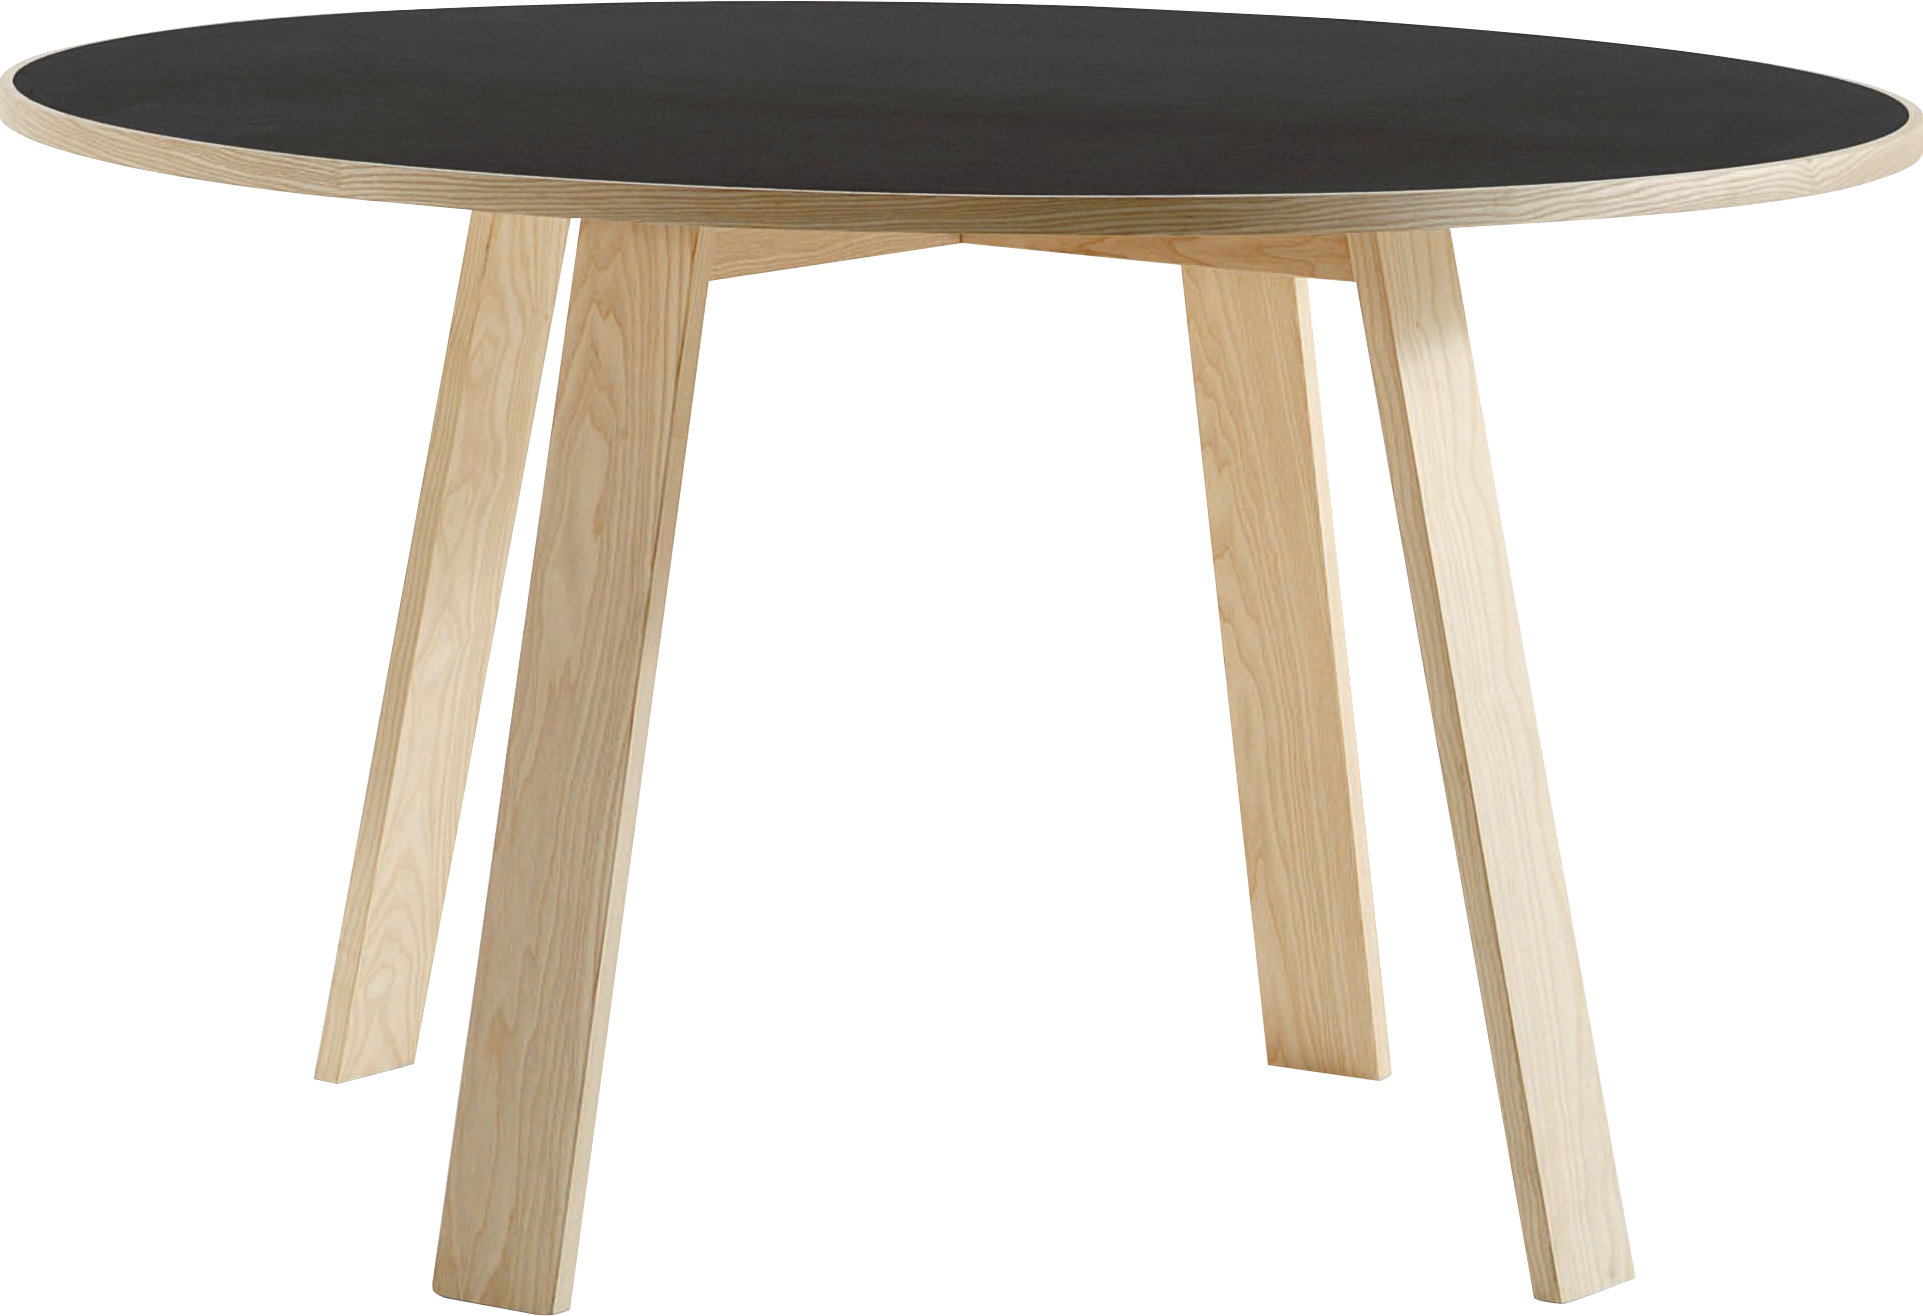 Transparent Side Tables For Living Rooms Within Latest Table Png Image Transparent Image Download, Size: 1923x1316px (Photo 7 of 15)